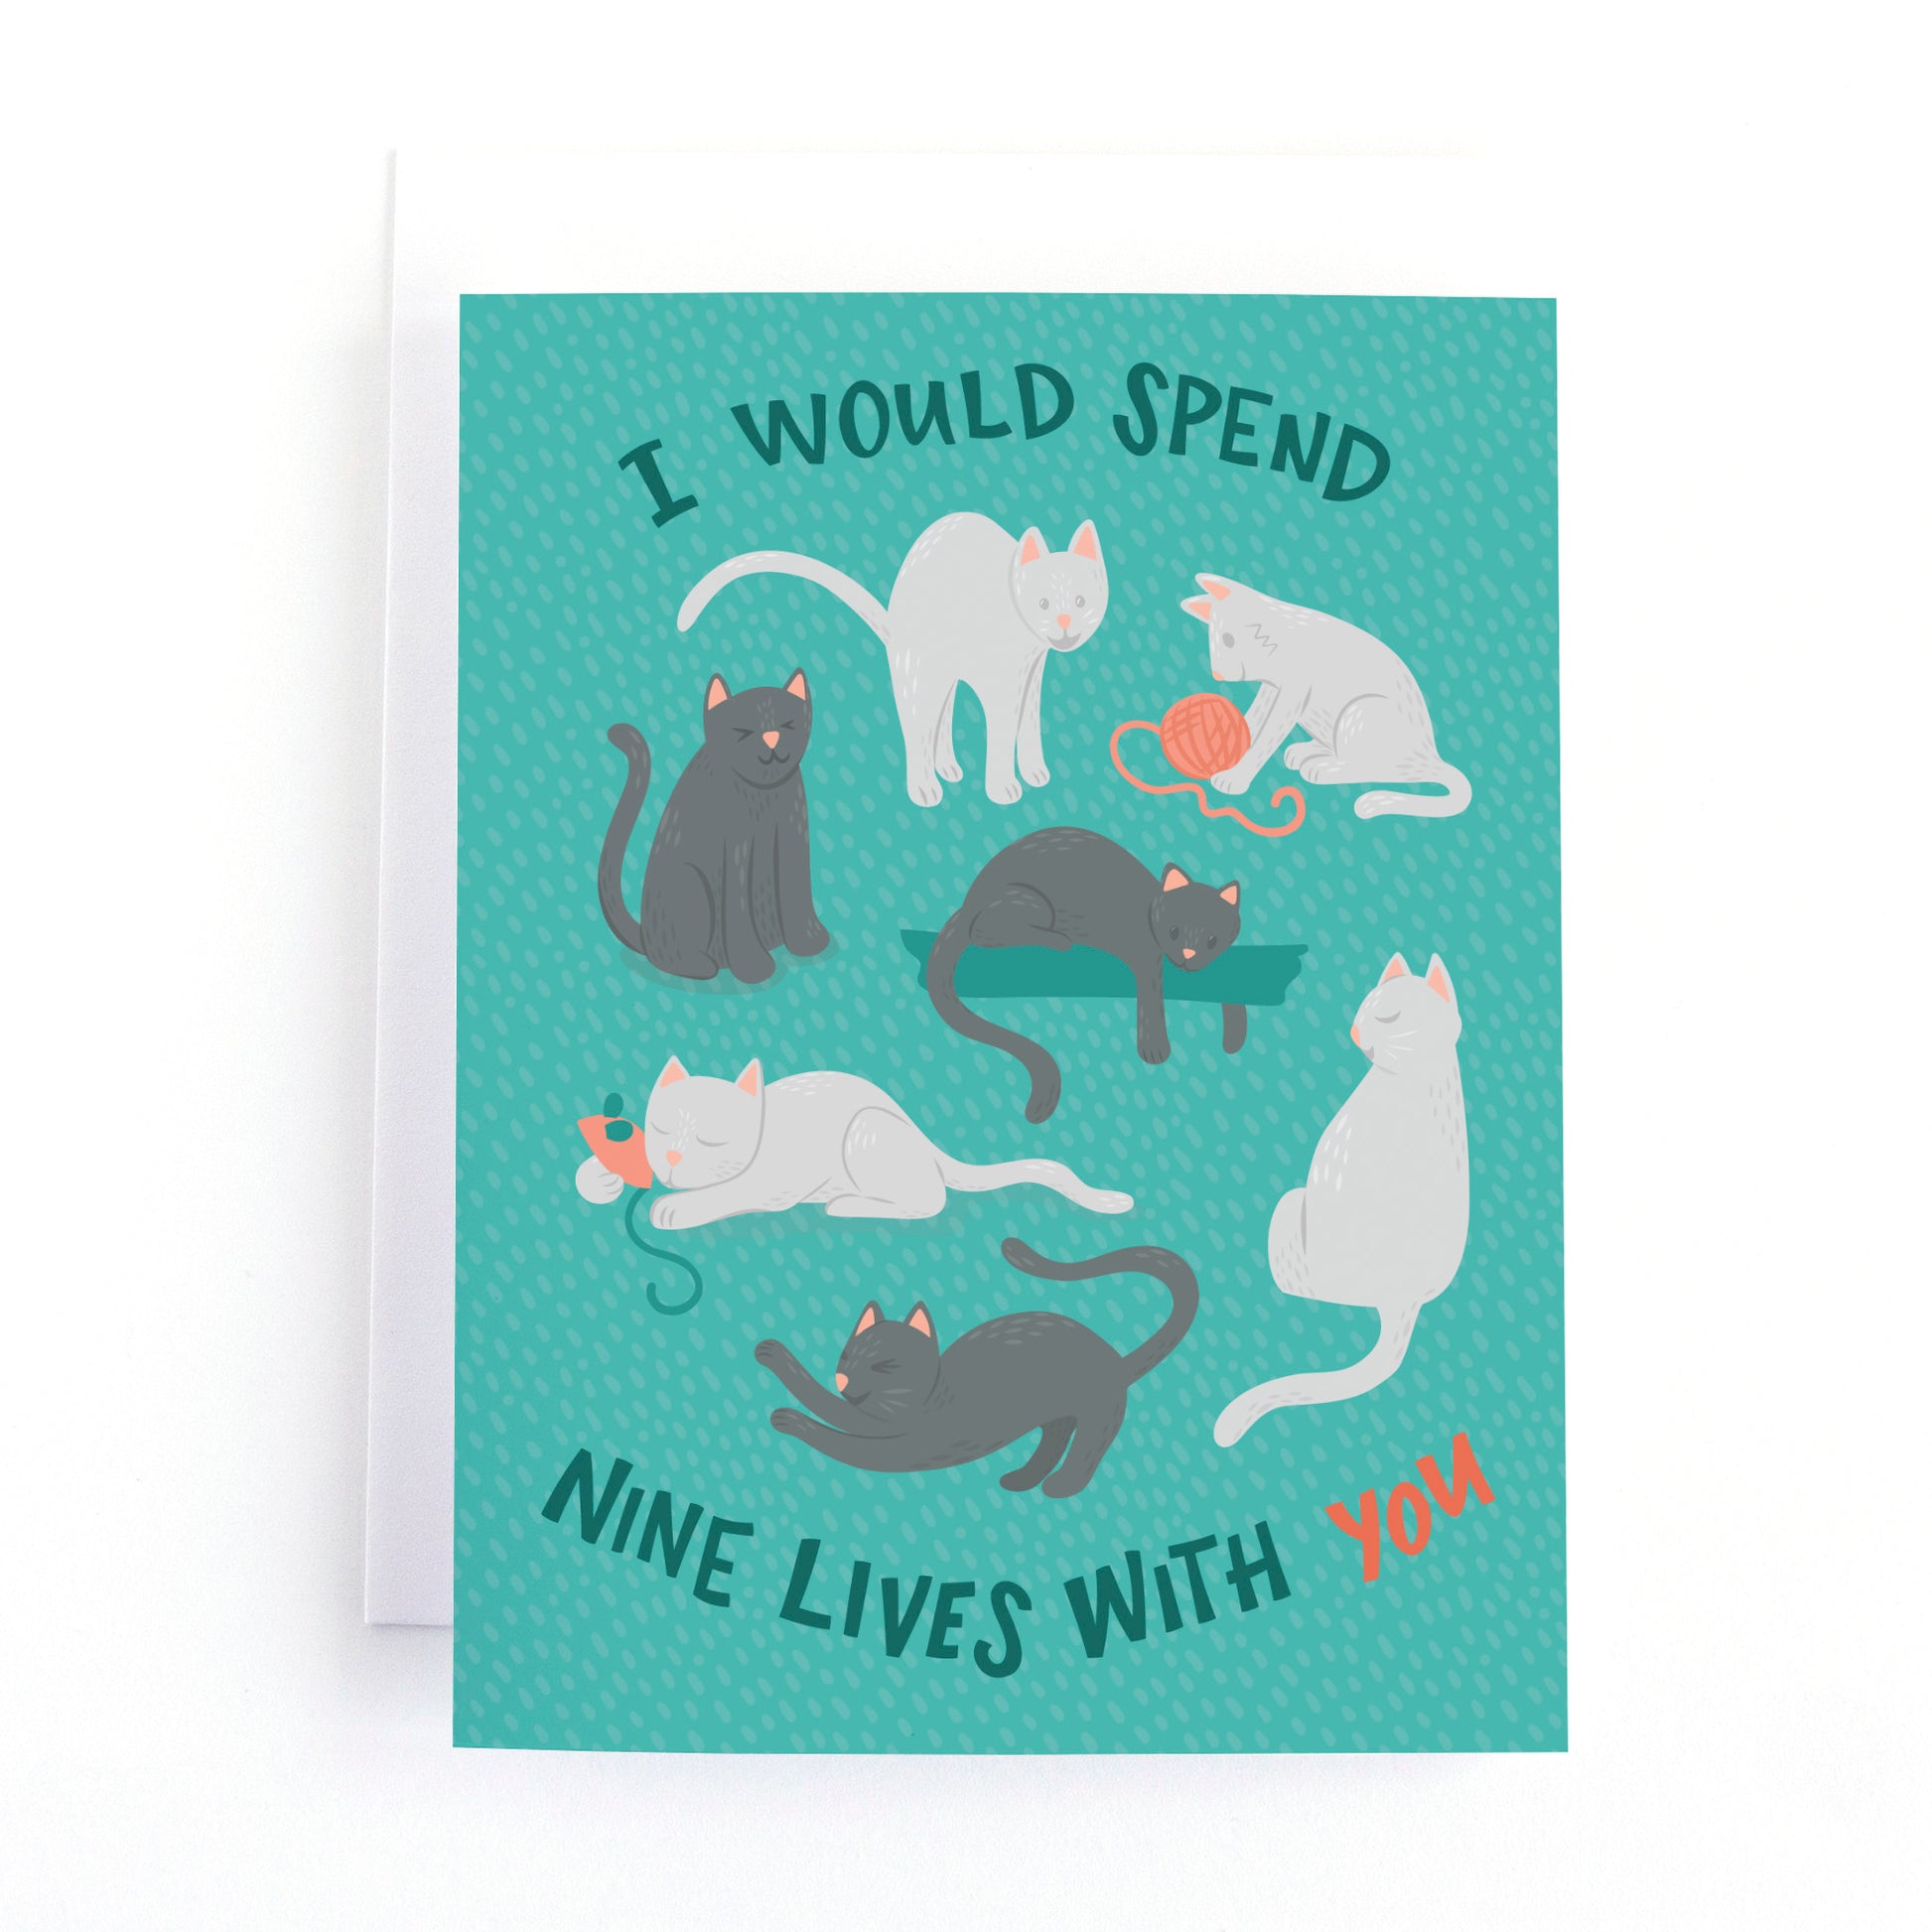 funny valentine's card with illustrations of cats and the text I would spend nine lives with YOU.